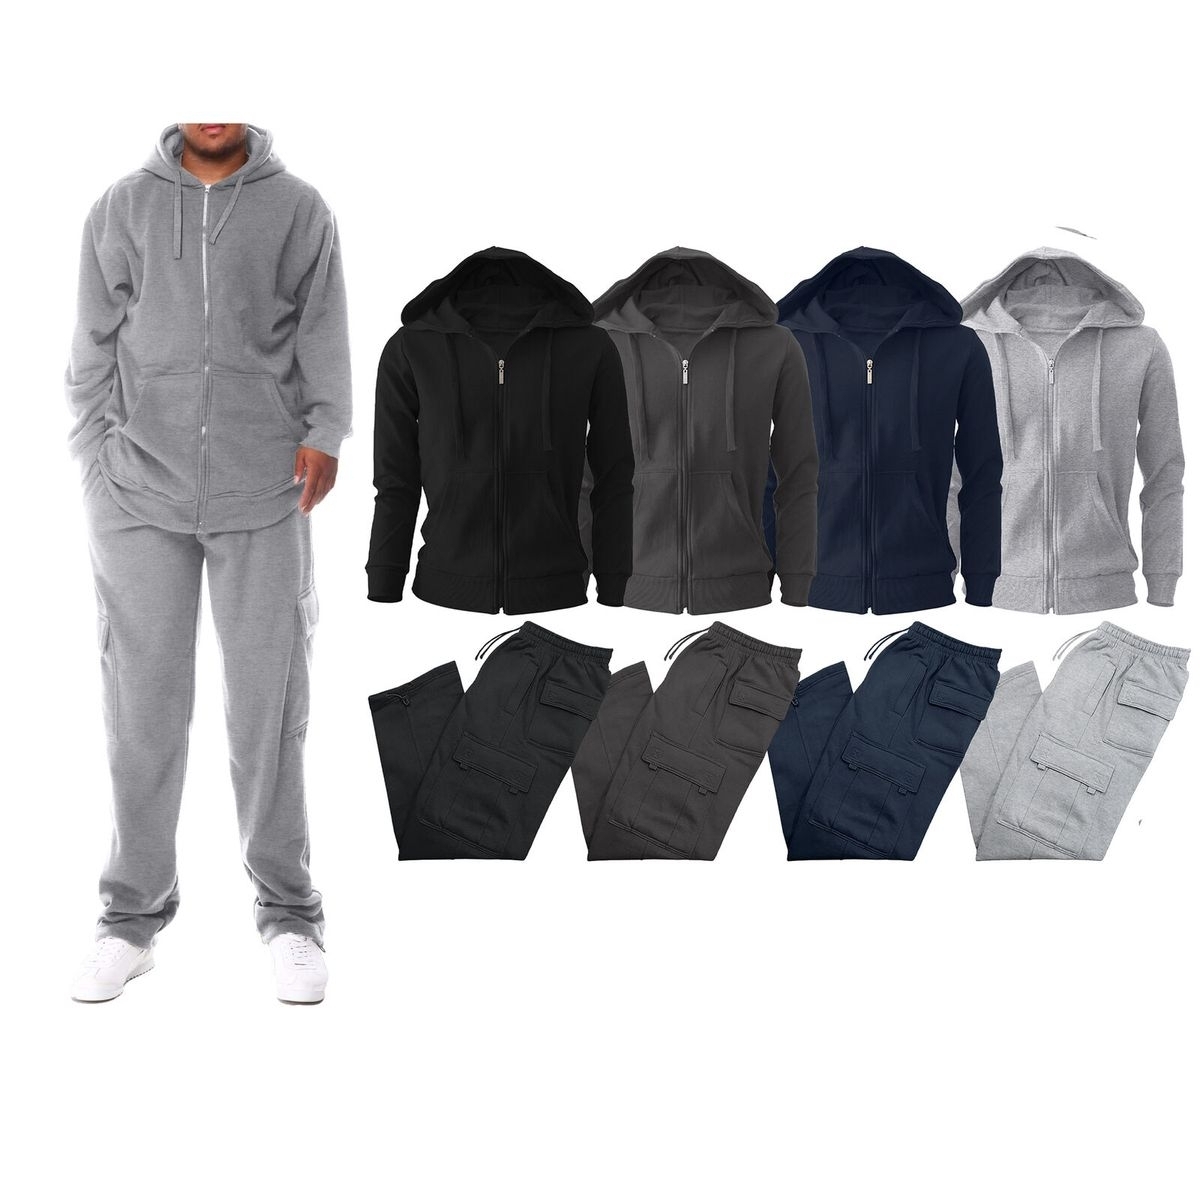 Men's Big & Tall Winter Warm Athletic Active Cozy Fleece Lined Multi-Pocket Full Zip Up Cargo Tracksuit - Charcoal, X-large